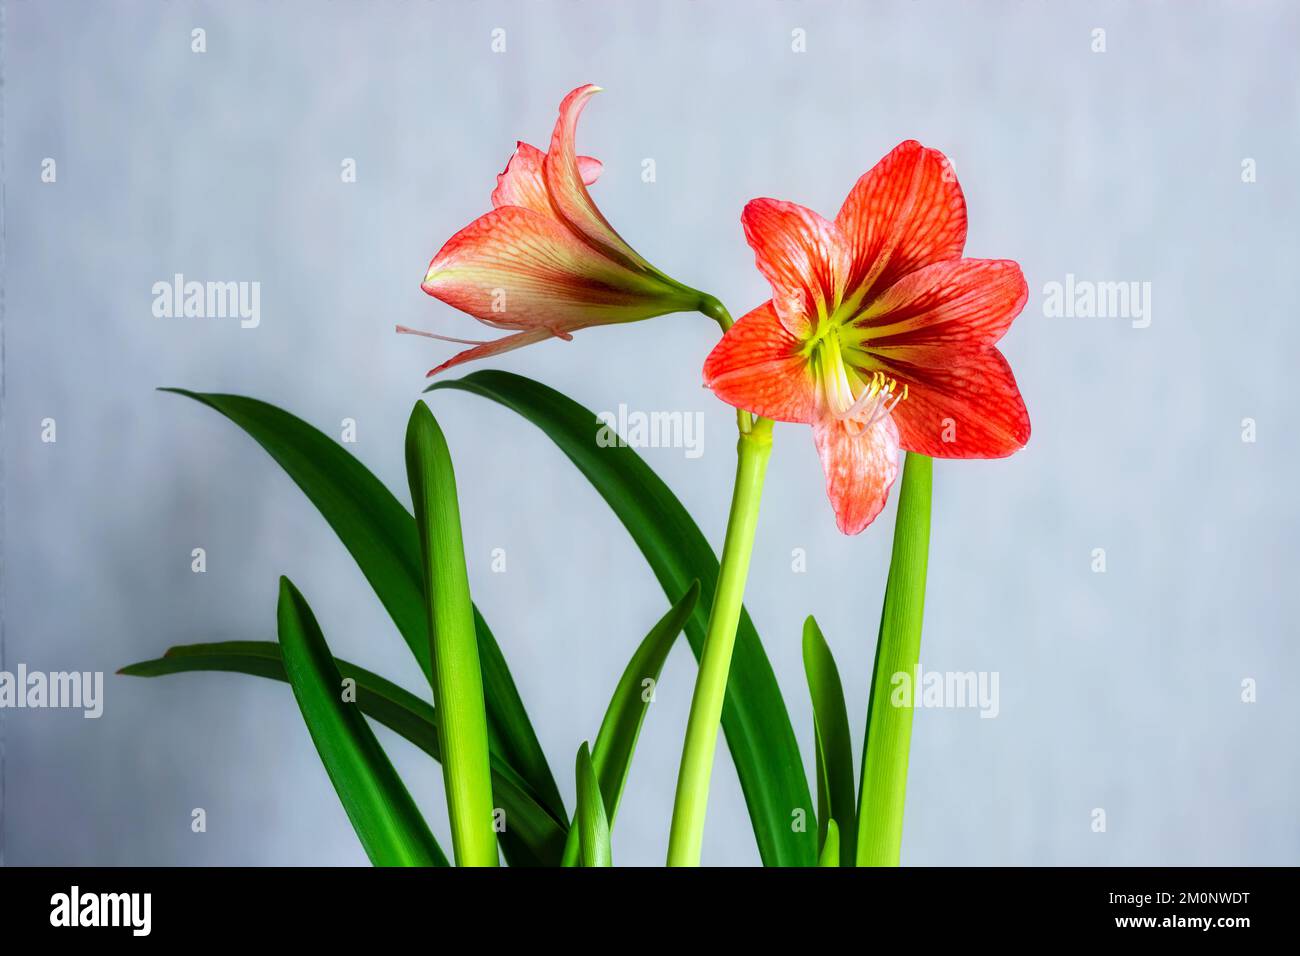 Bright, colorful flowers of hippeastrum red with green leaves on a gray background. Stock Photo